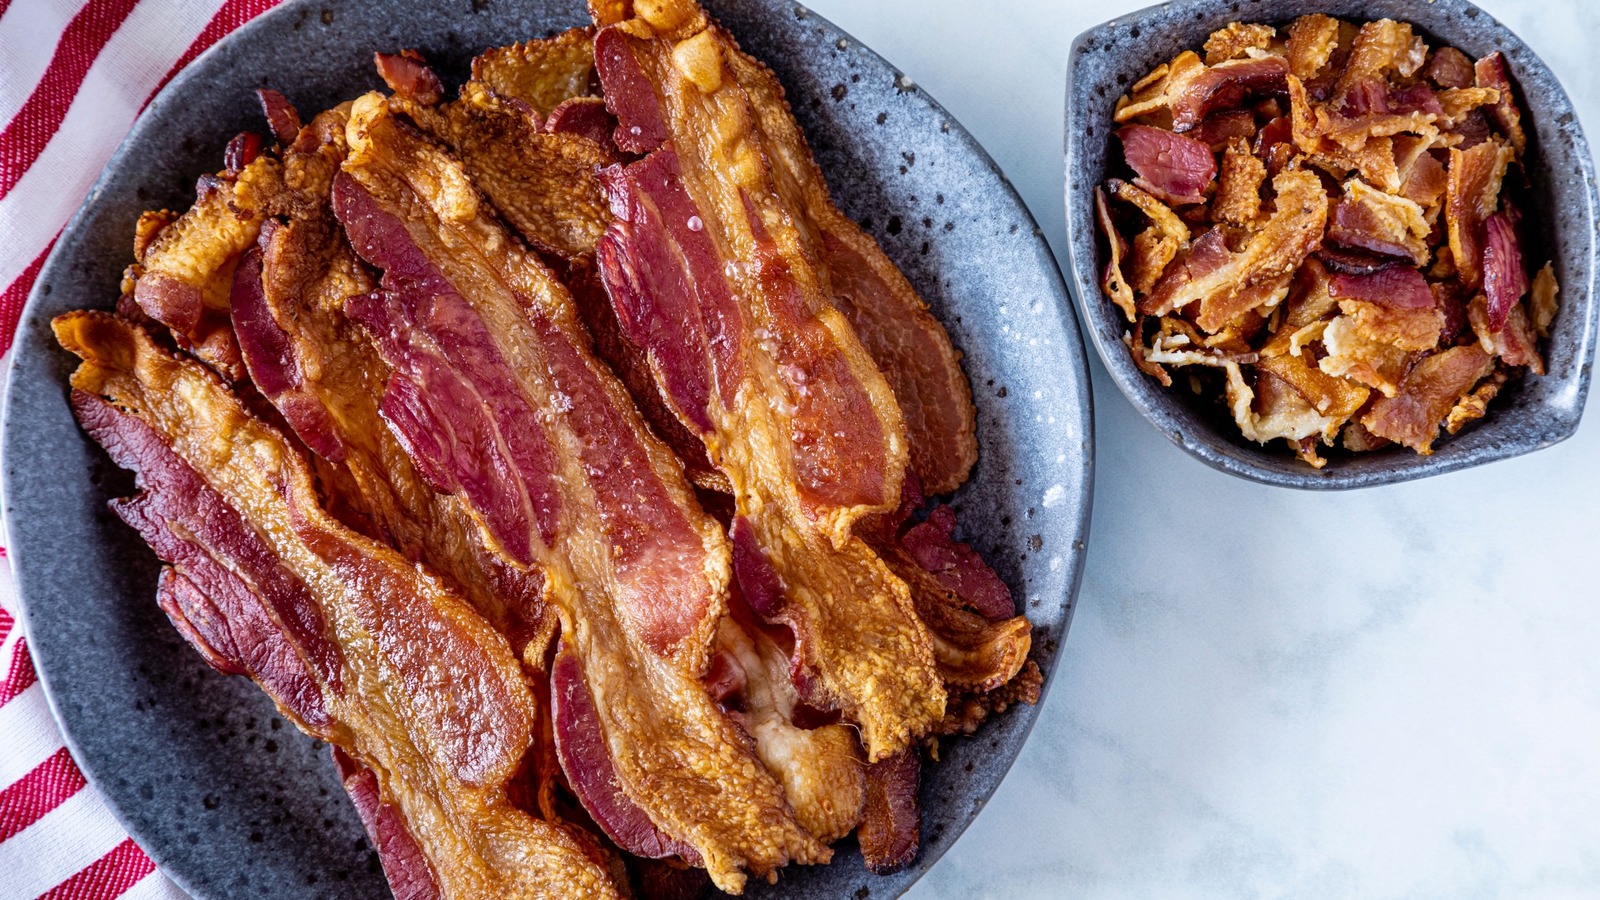 This Now-$17 Pan Is the 'Secret to Achieving Maximum Crispiness' on Bacon